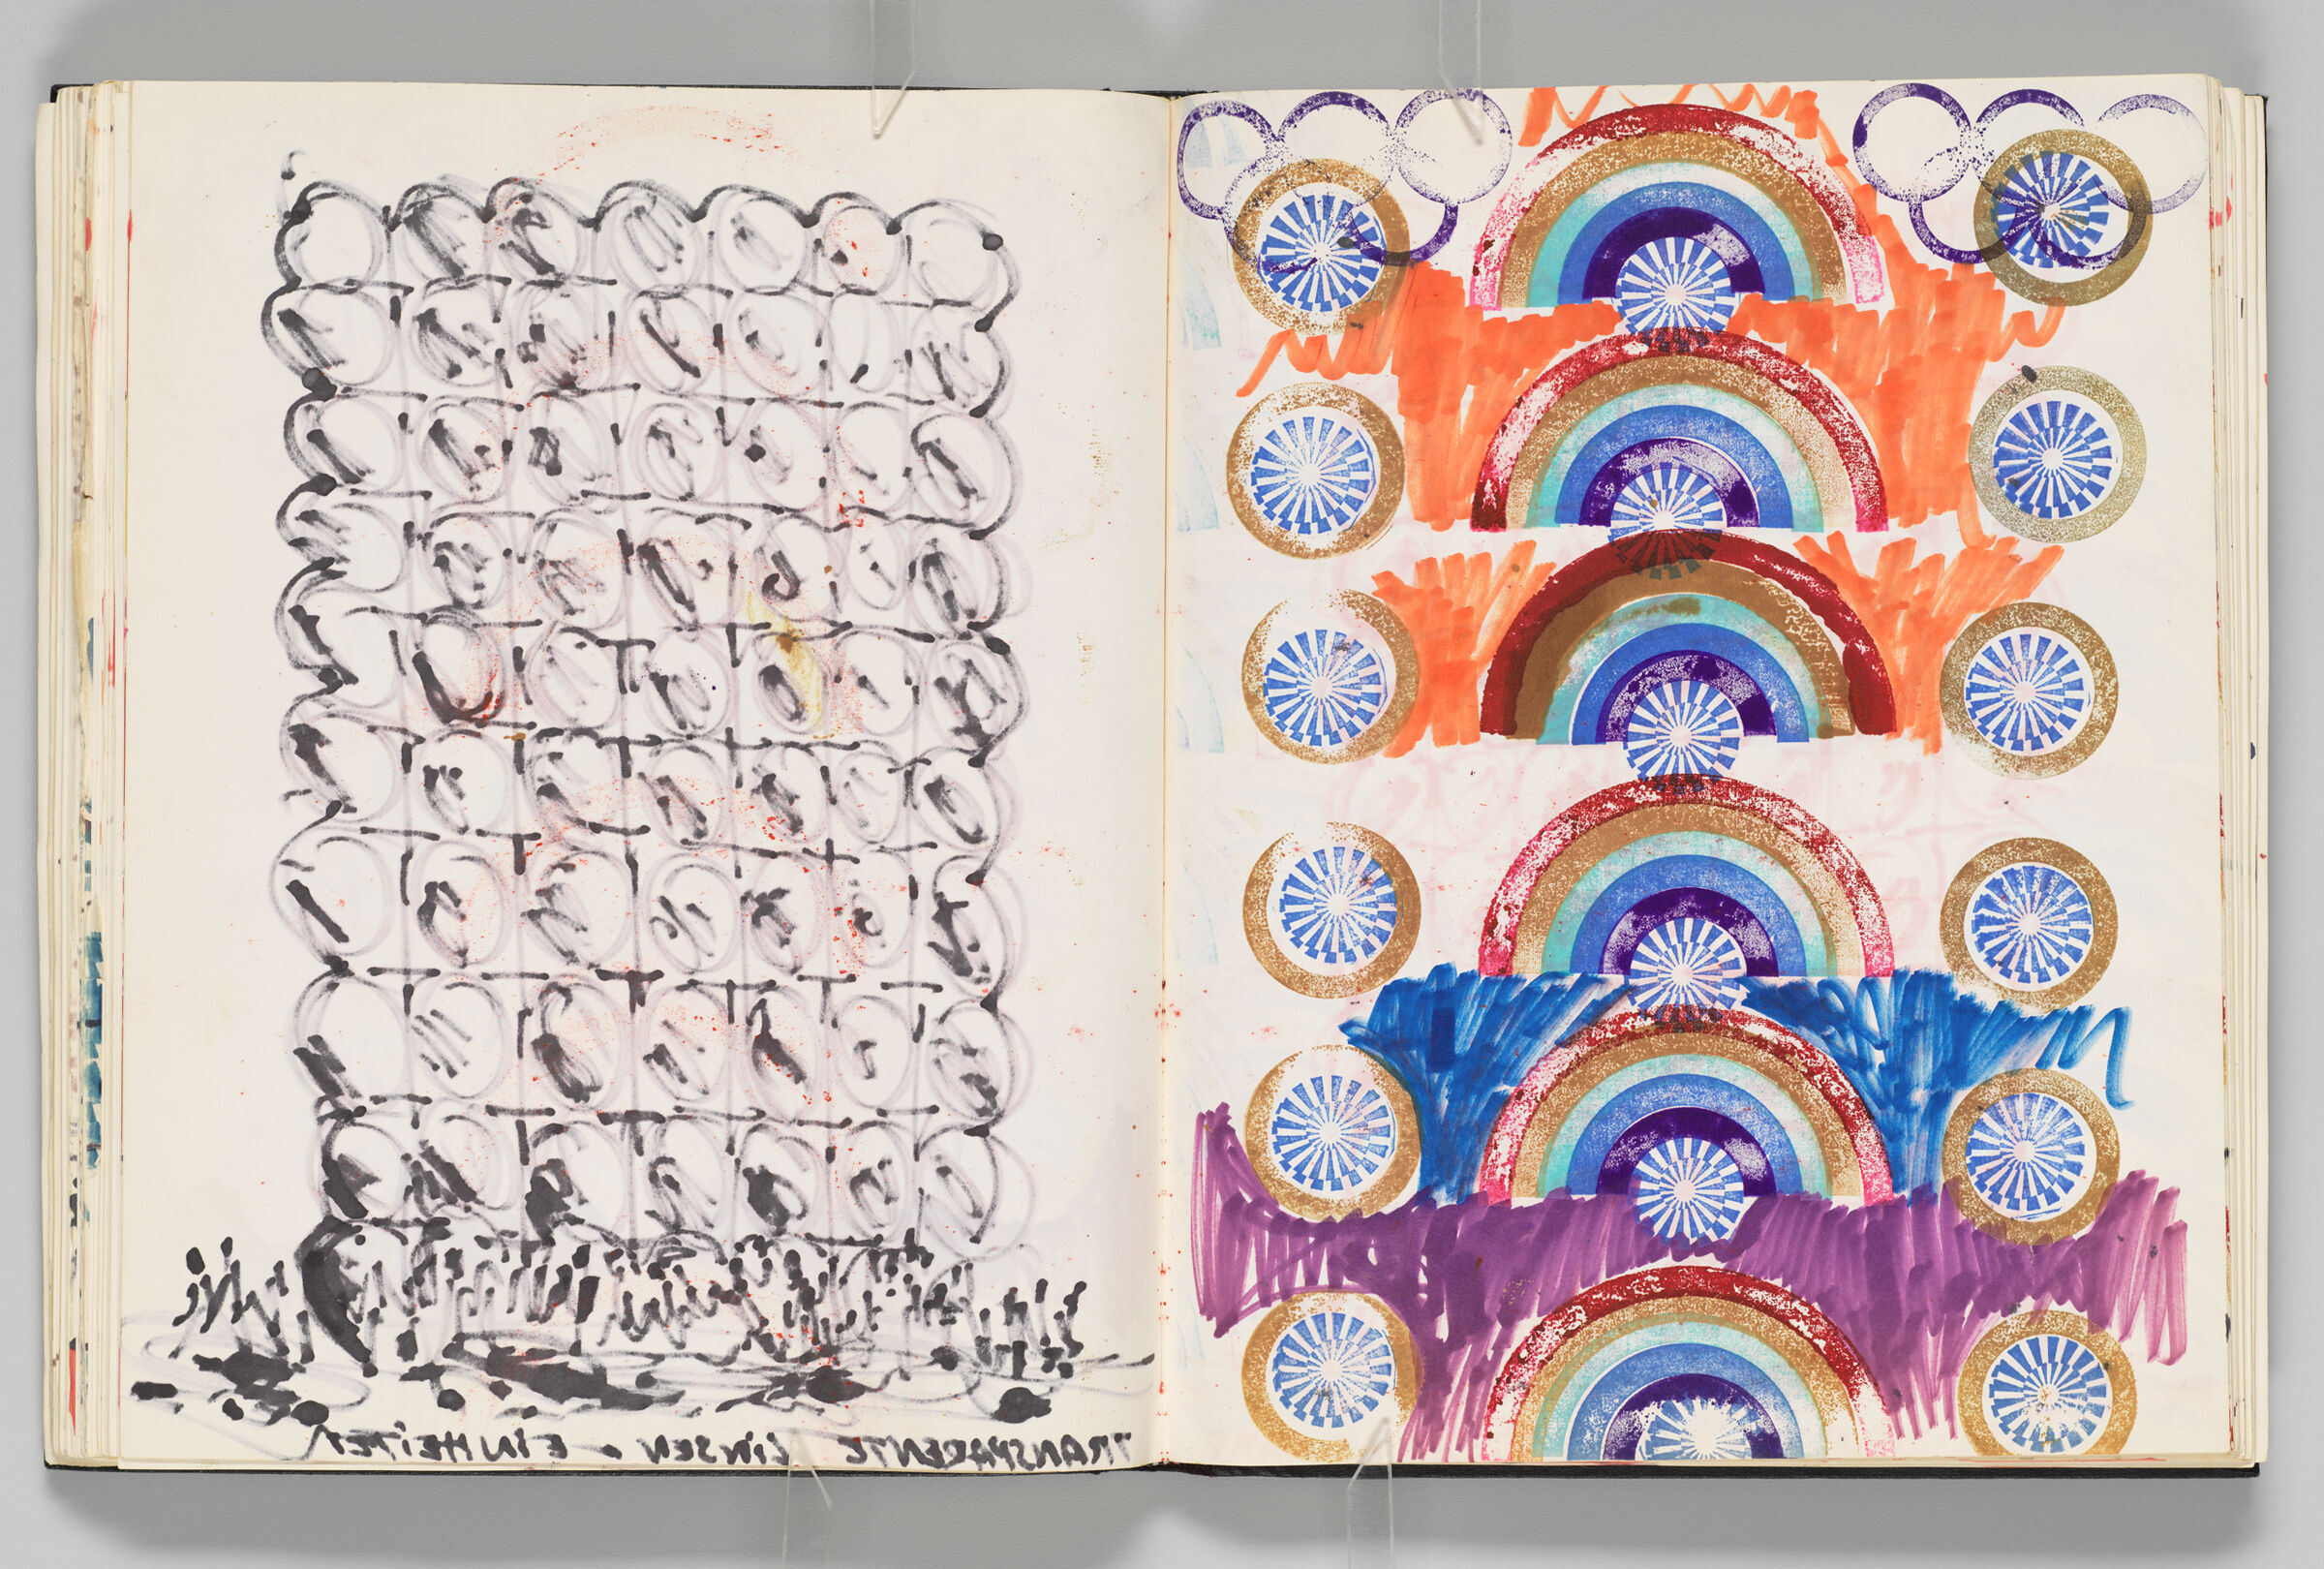 Untitled (Bleed-Through Of Previous Page, Left Page); Untitled (Rainbow And Circular Stamp Impressions, Right Page)